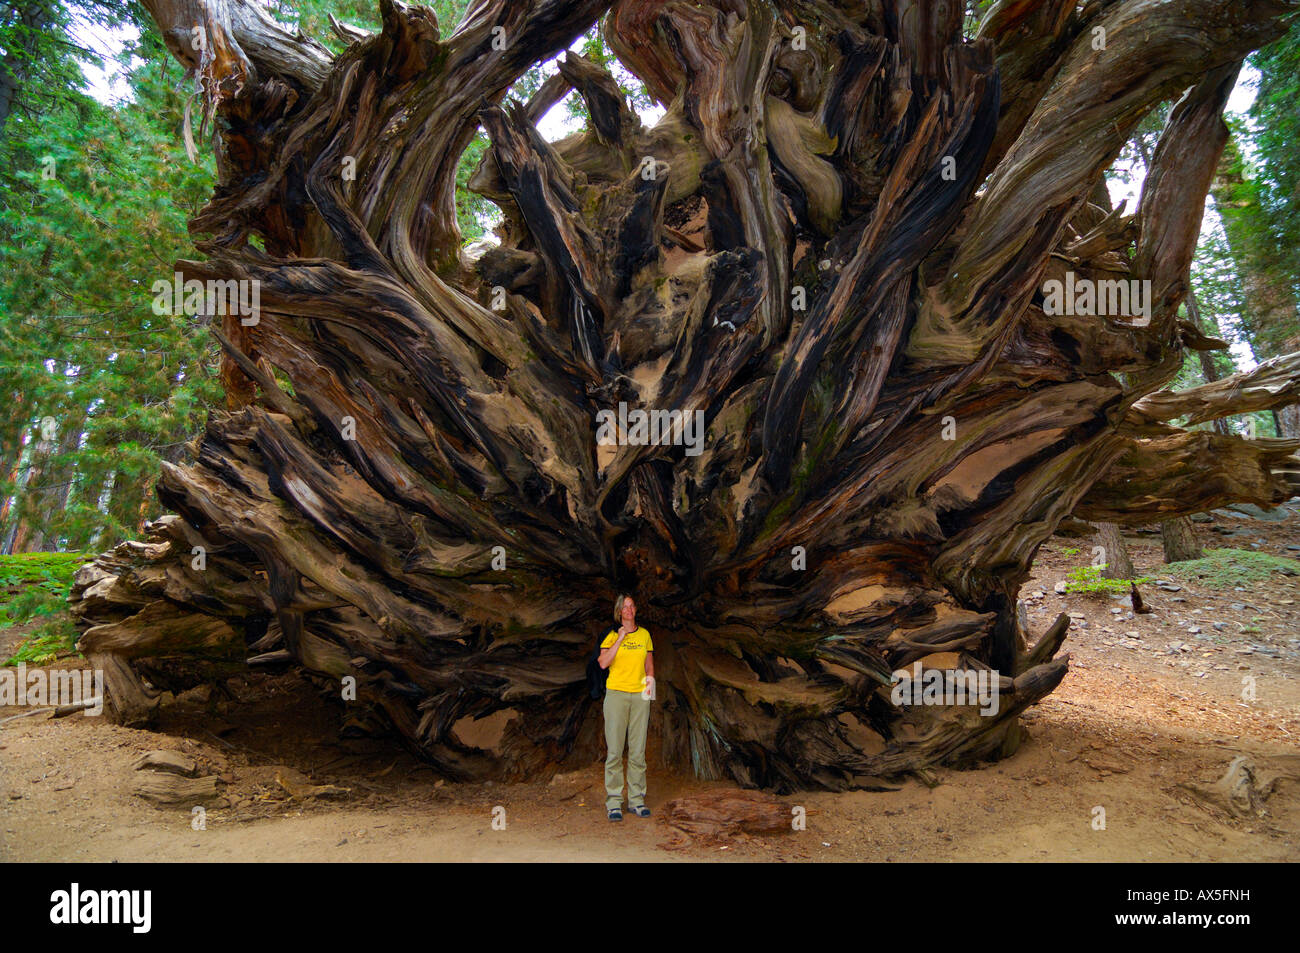 Woman standing in front of the huge roots of a Giant Sequoia (Sequoiadendron giganteum), Sequoia National Park, California, USA Stock Photo